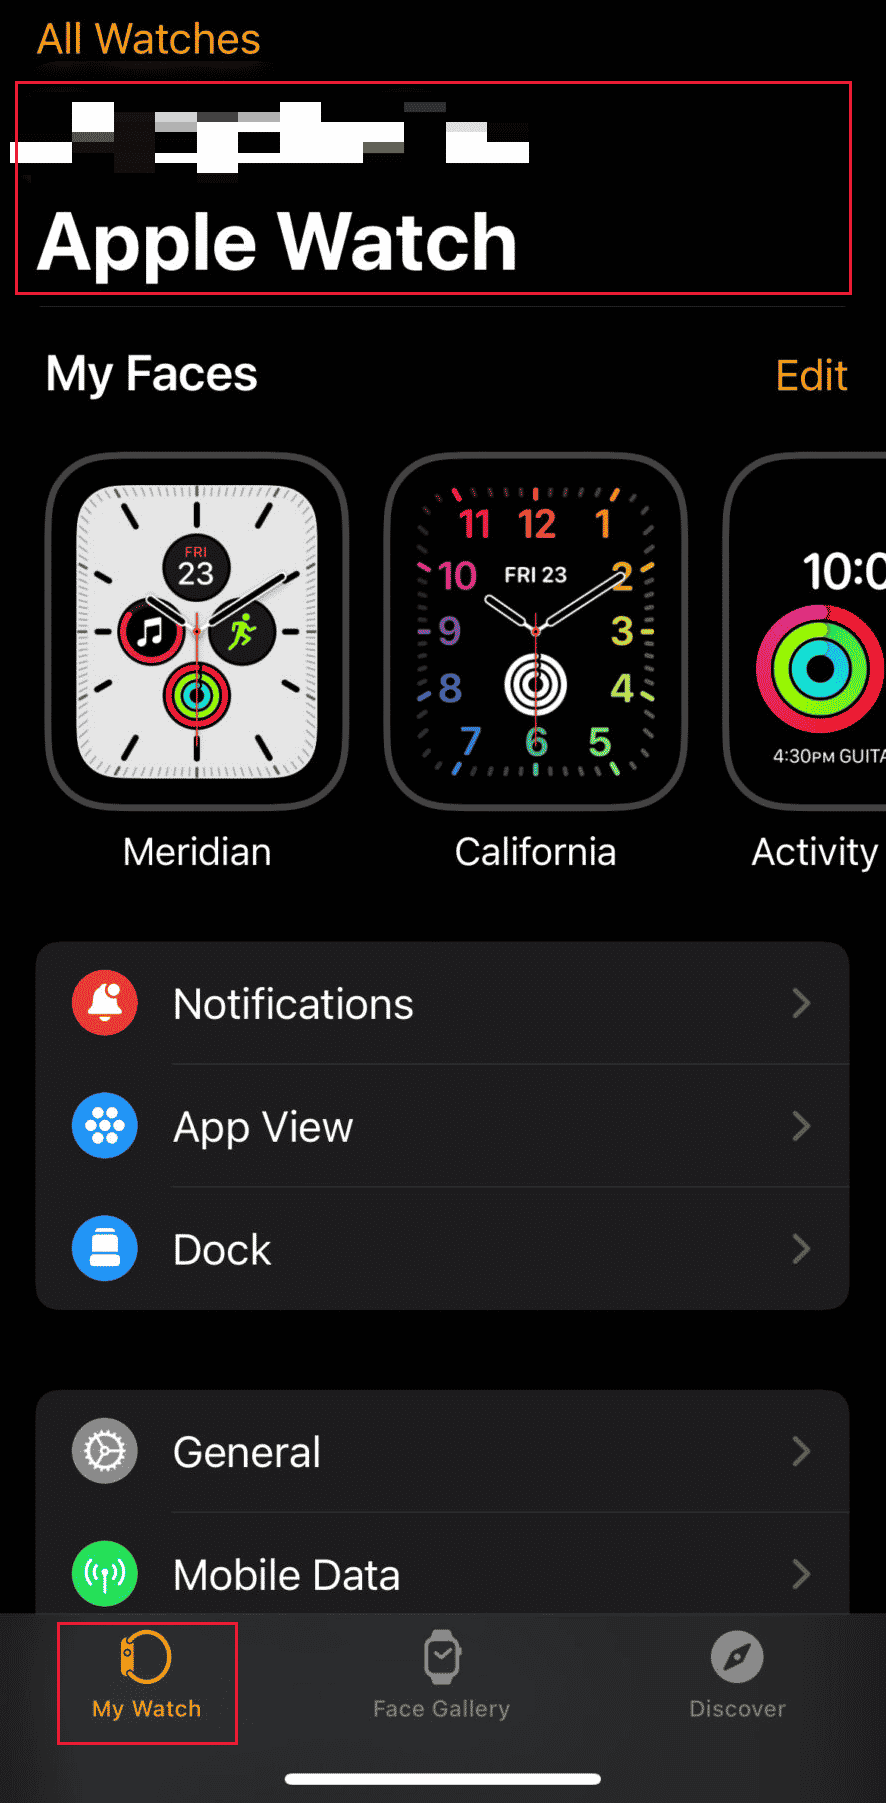 My Watch tab - tap on your Apple Watch | restore Apple Watch to factory settings